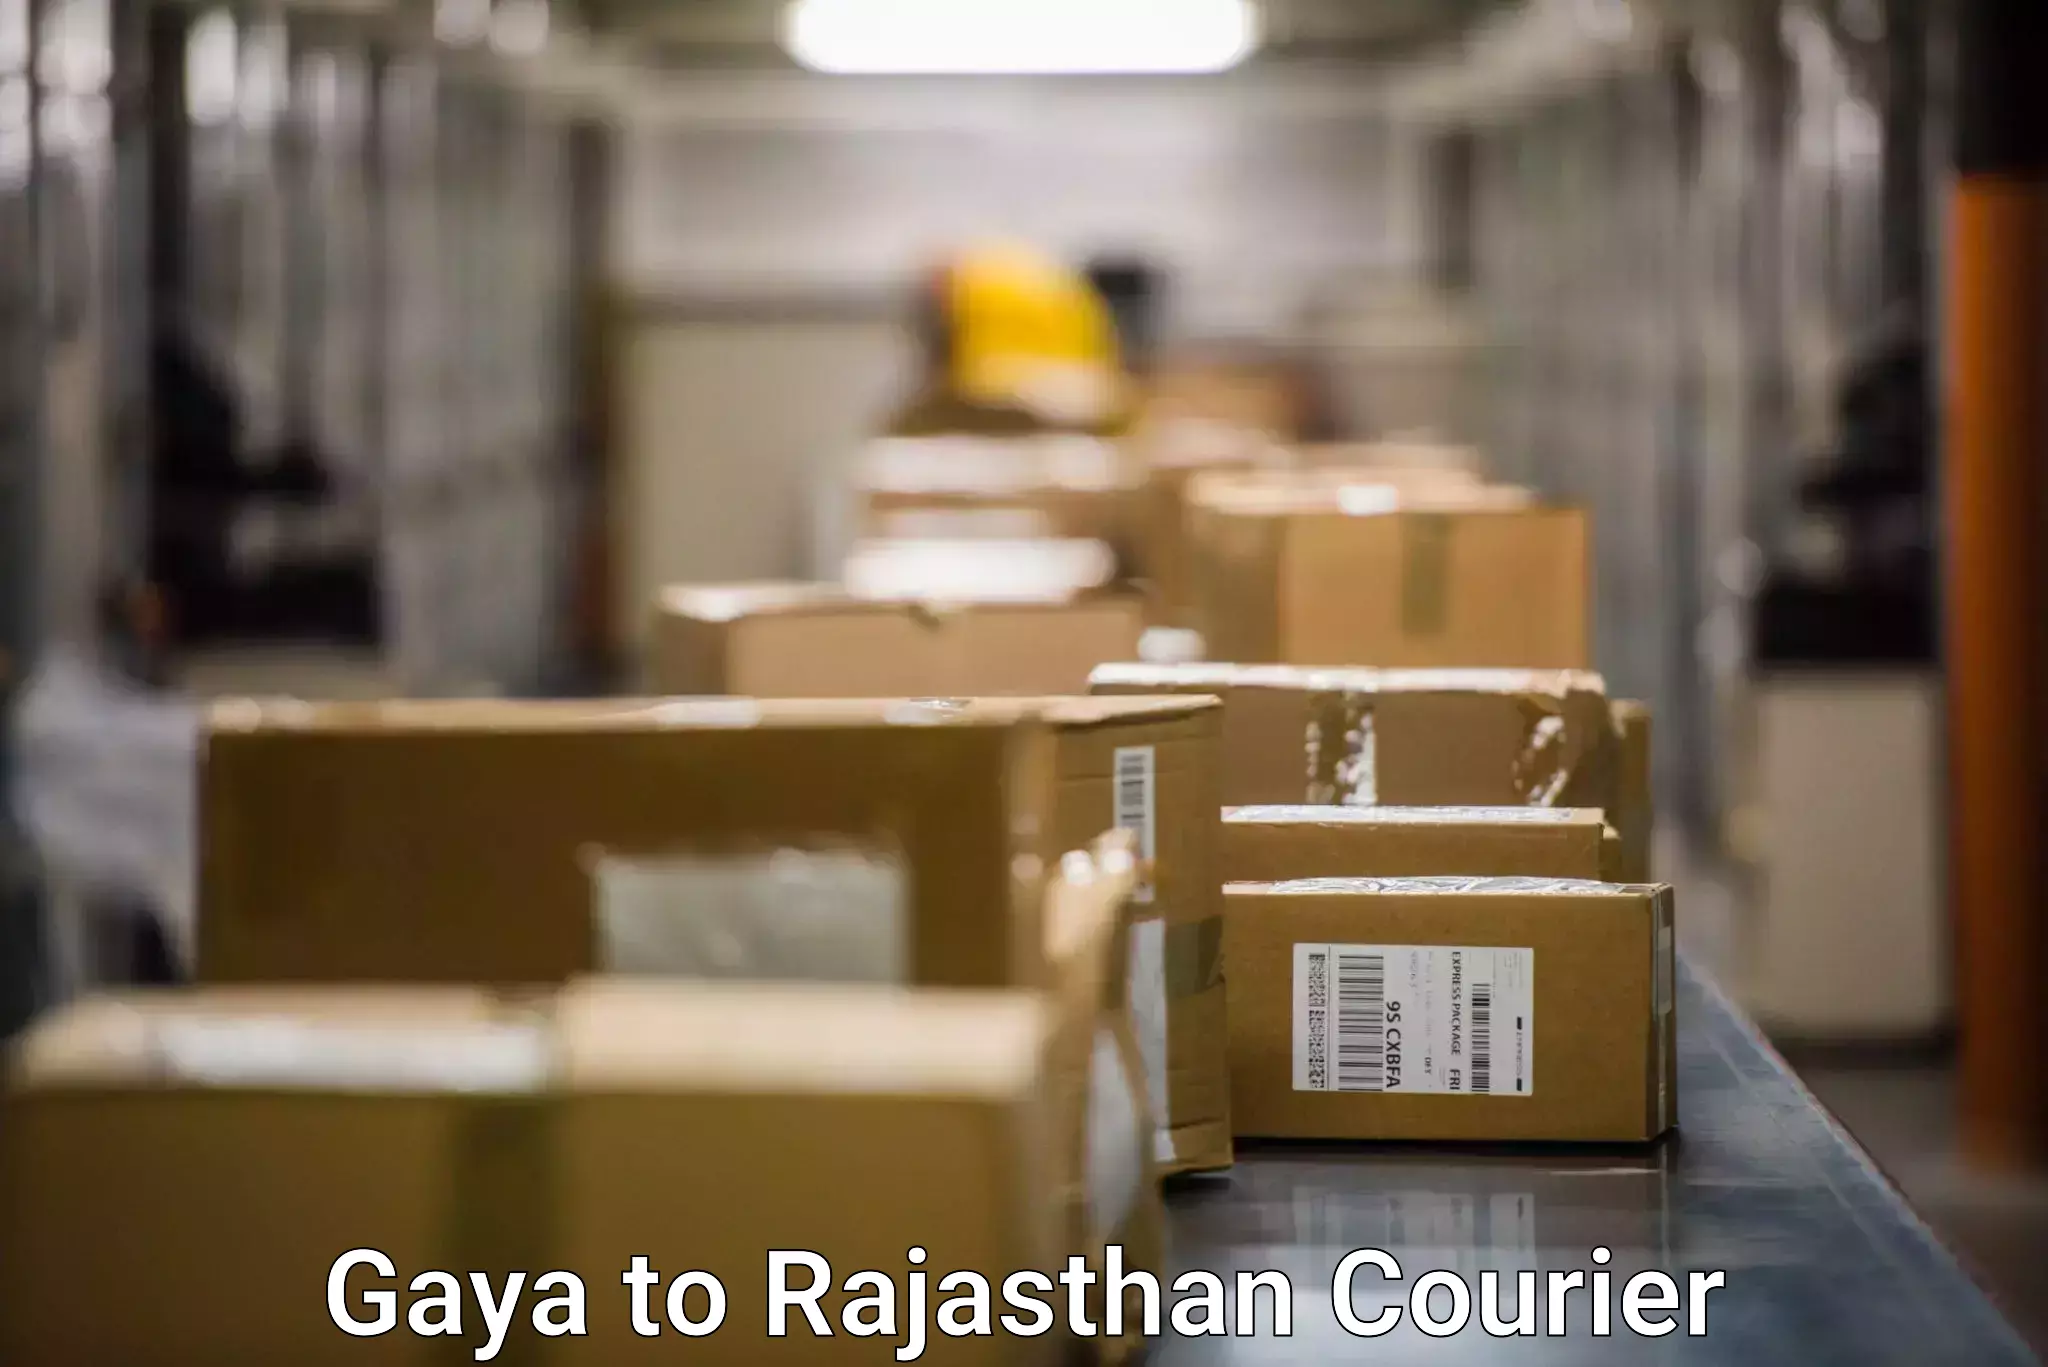 Premium delivery services Gaya to Weir